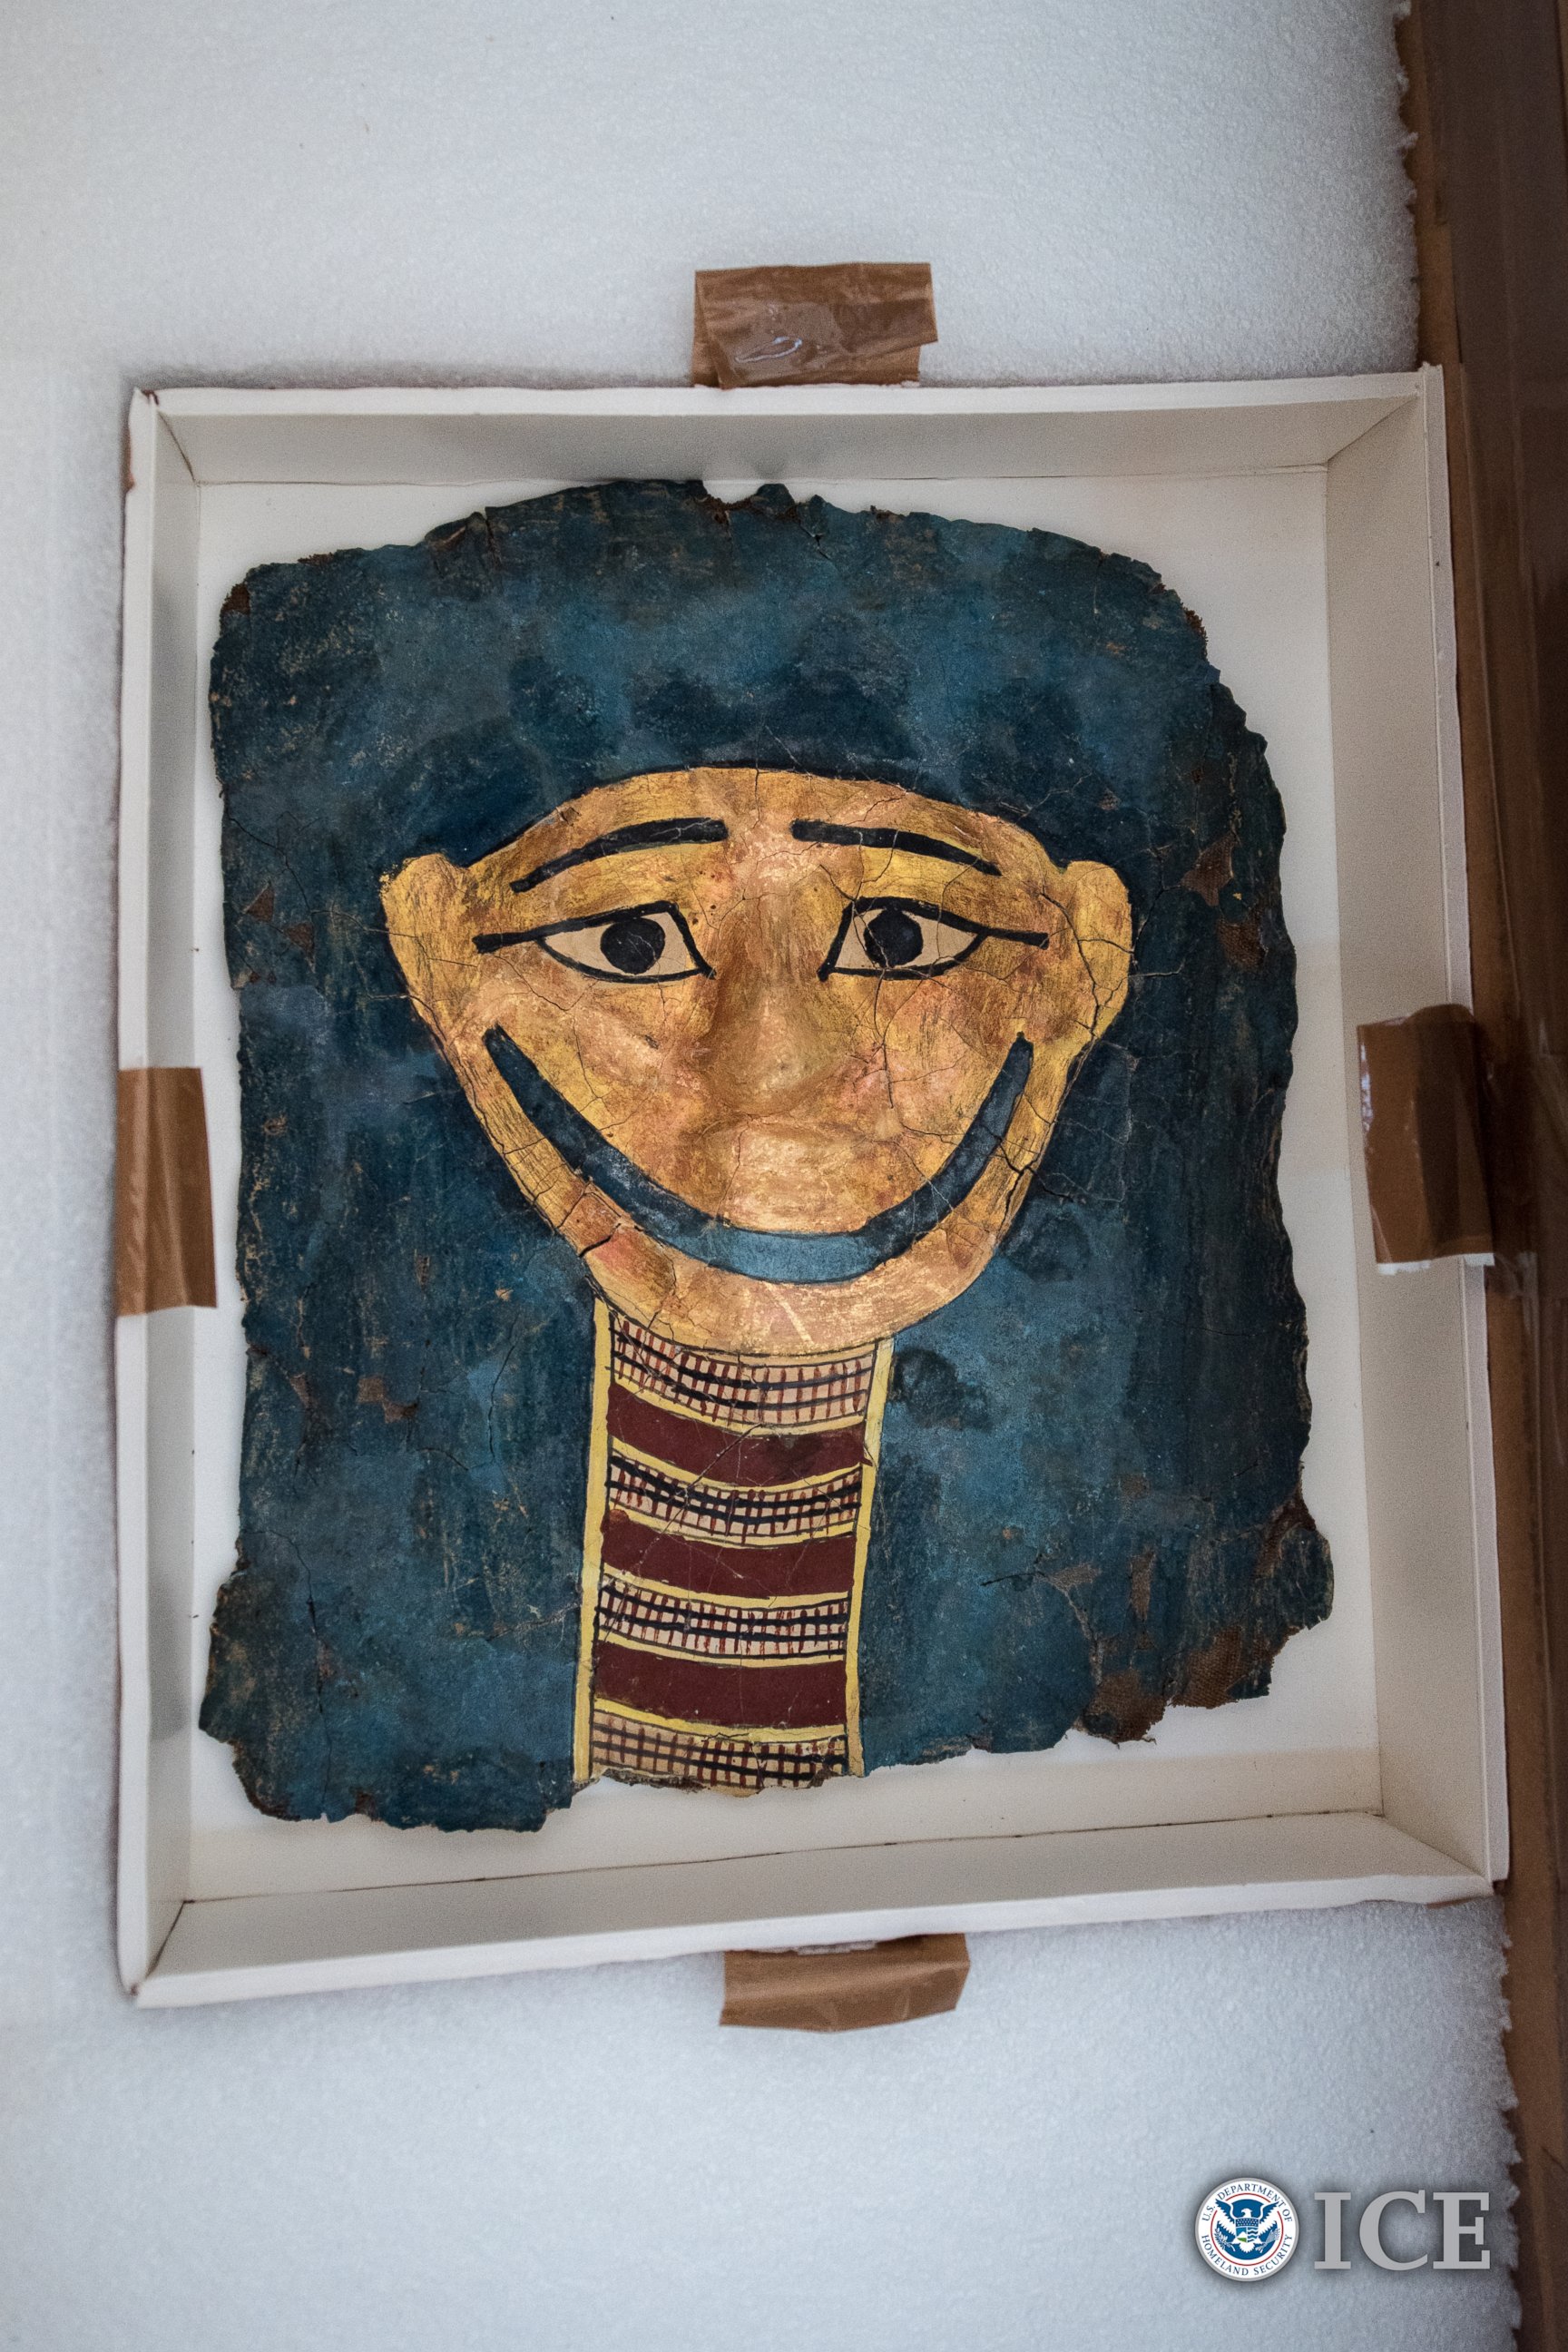 PHOTO: One of a series of illegally smuggled ancient artifacts repatriated to the government of Egypt at a ceremony December 1, 2016 at the Egyptian Embassy in Washington.